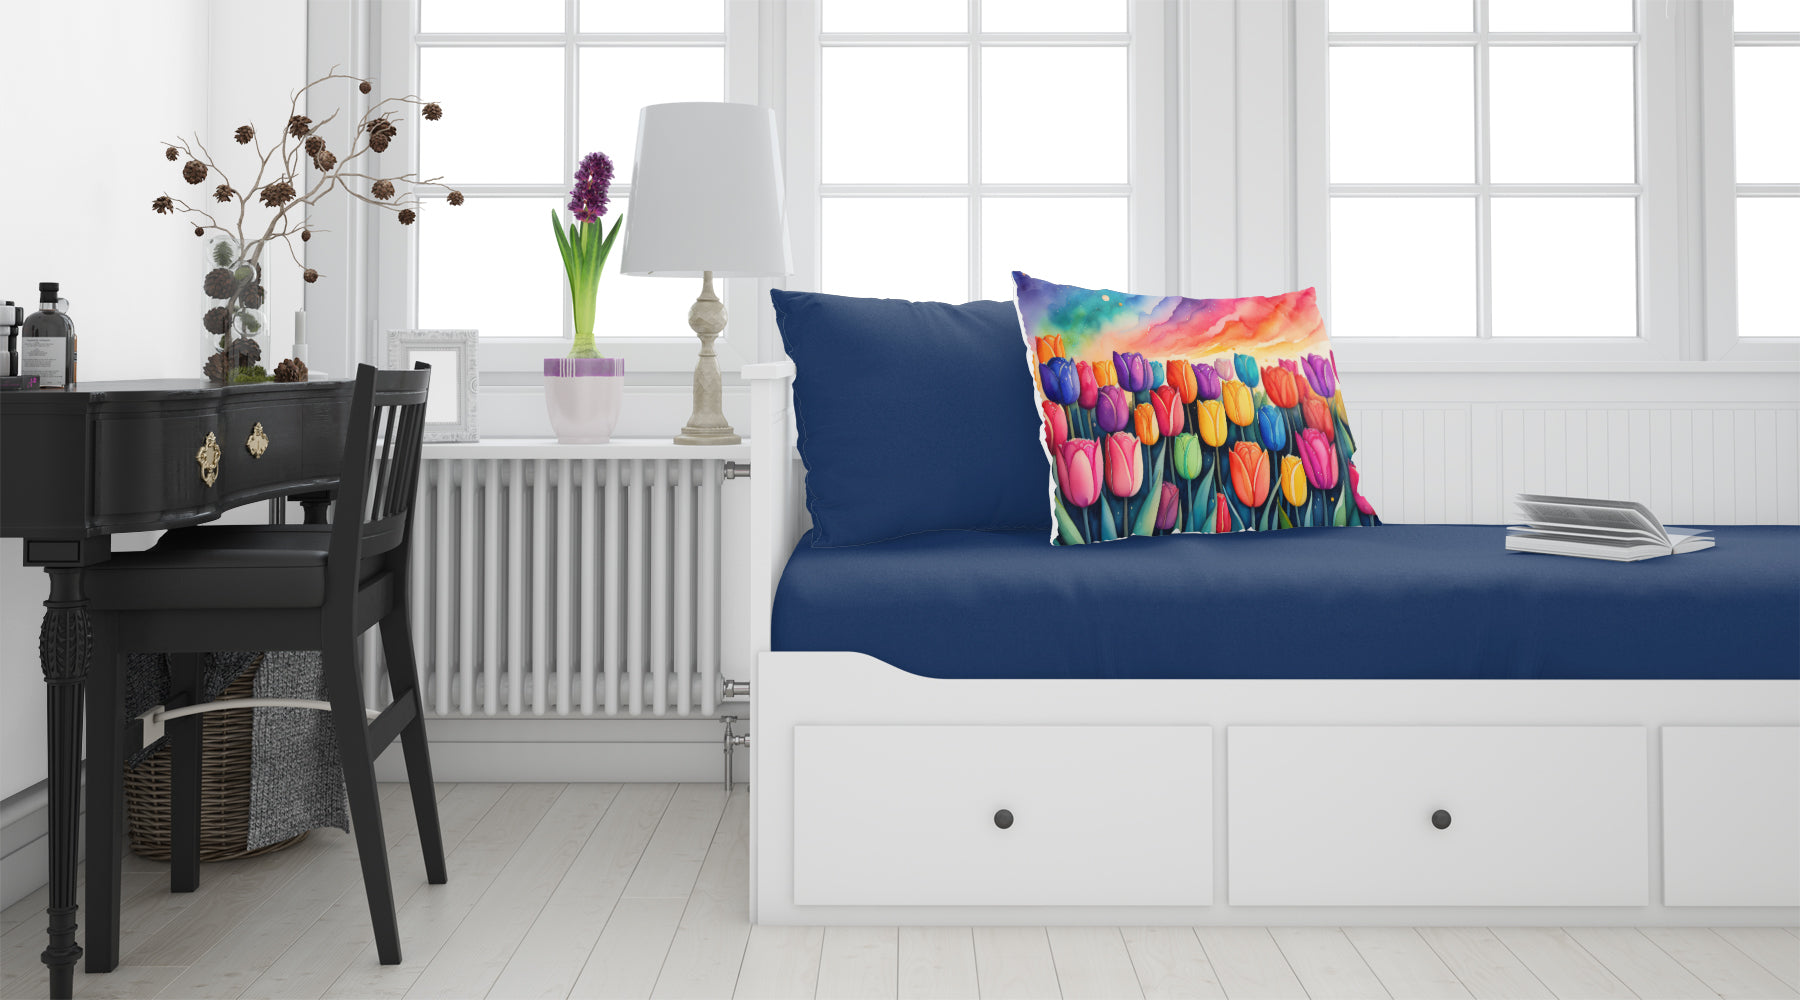 Buy this Tulips in Color Fabric Standard Pillowcase